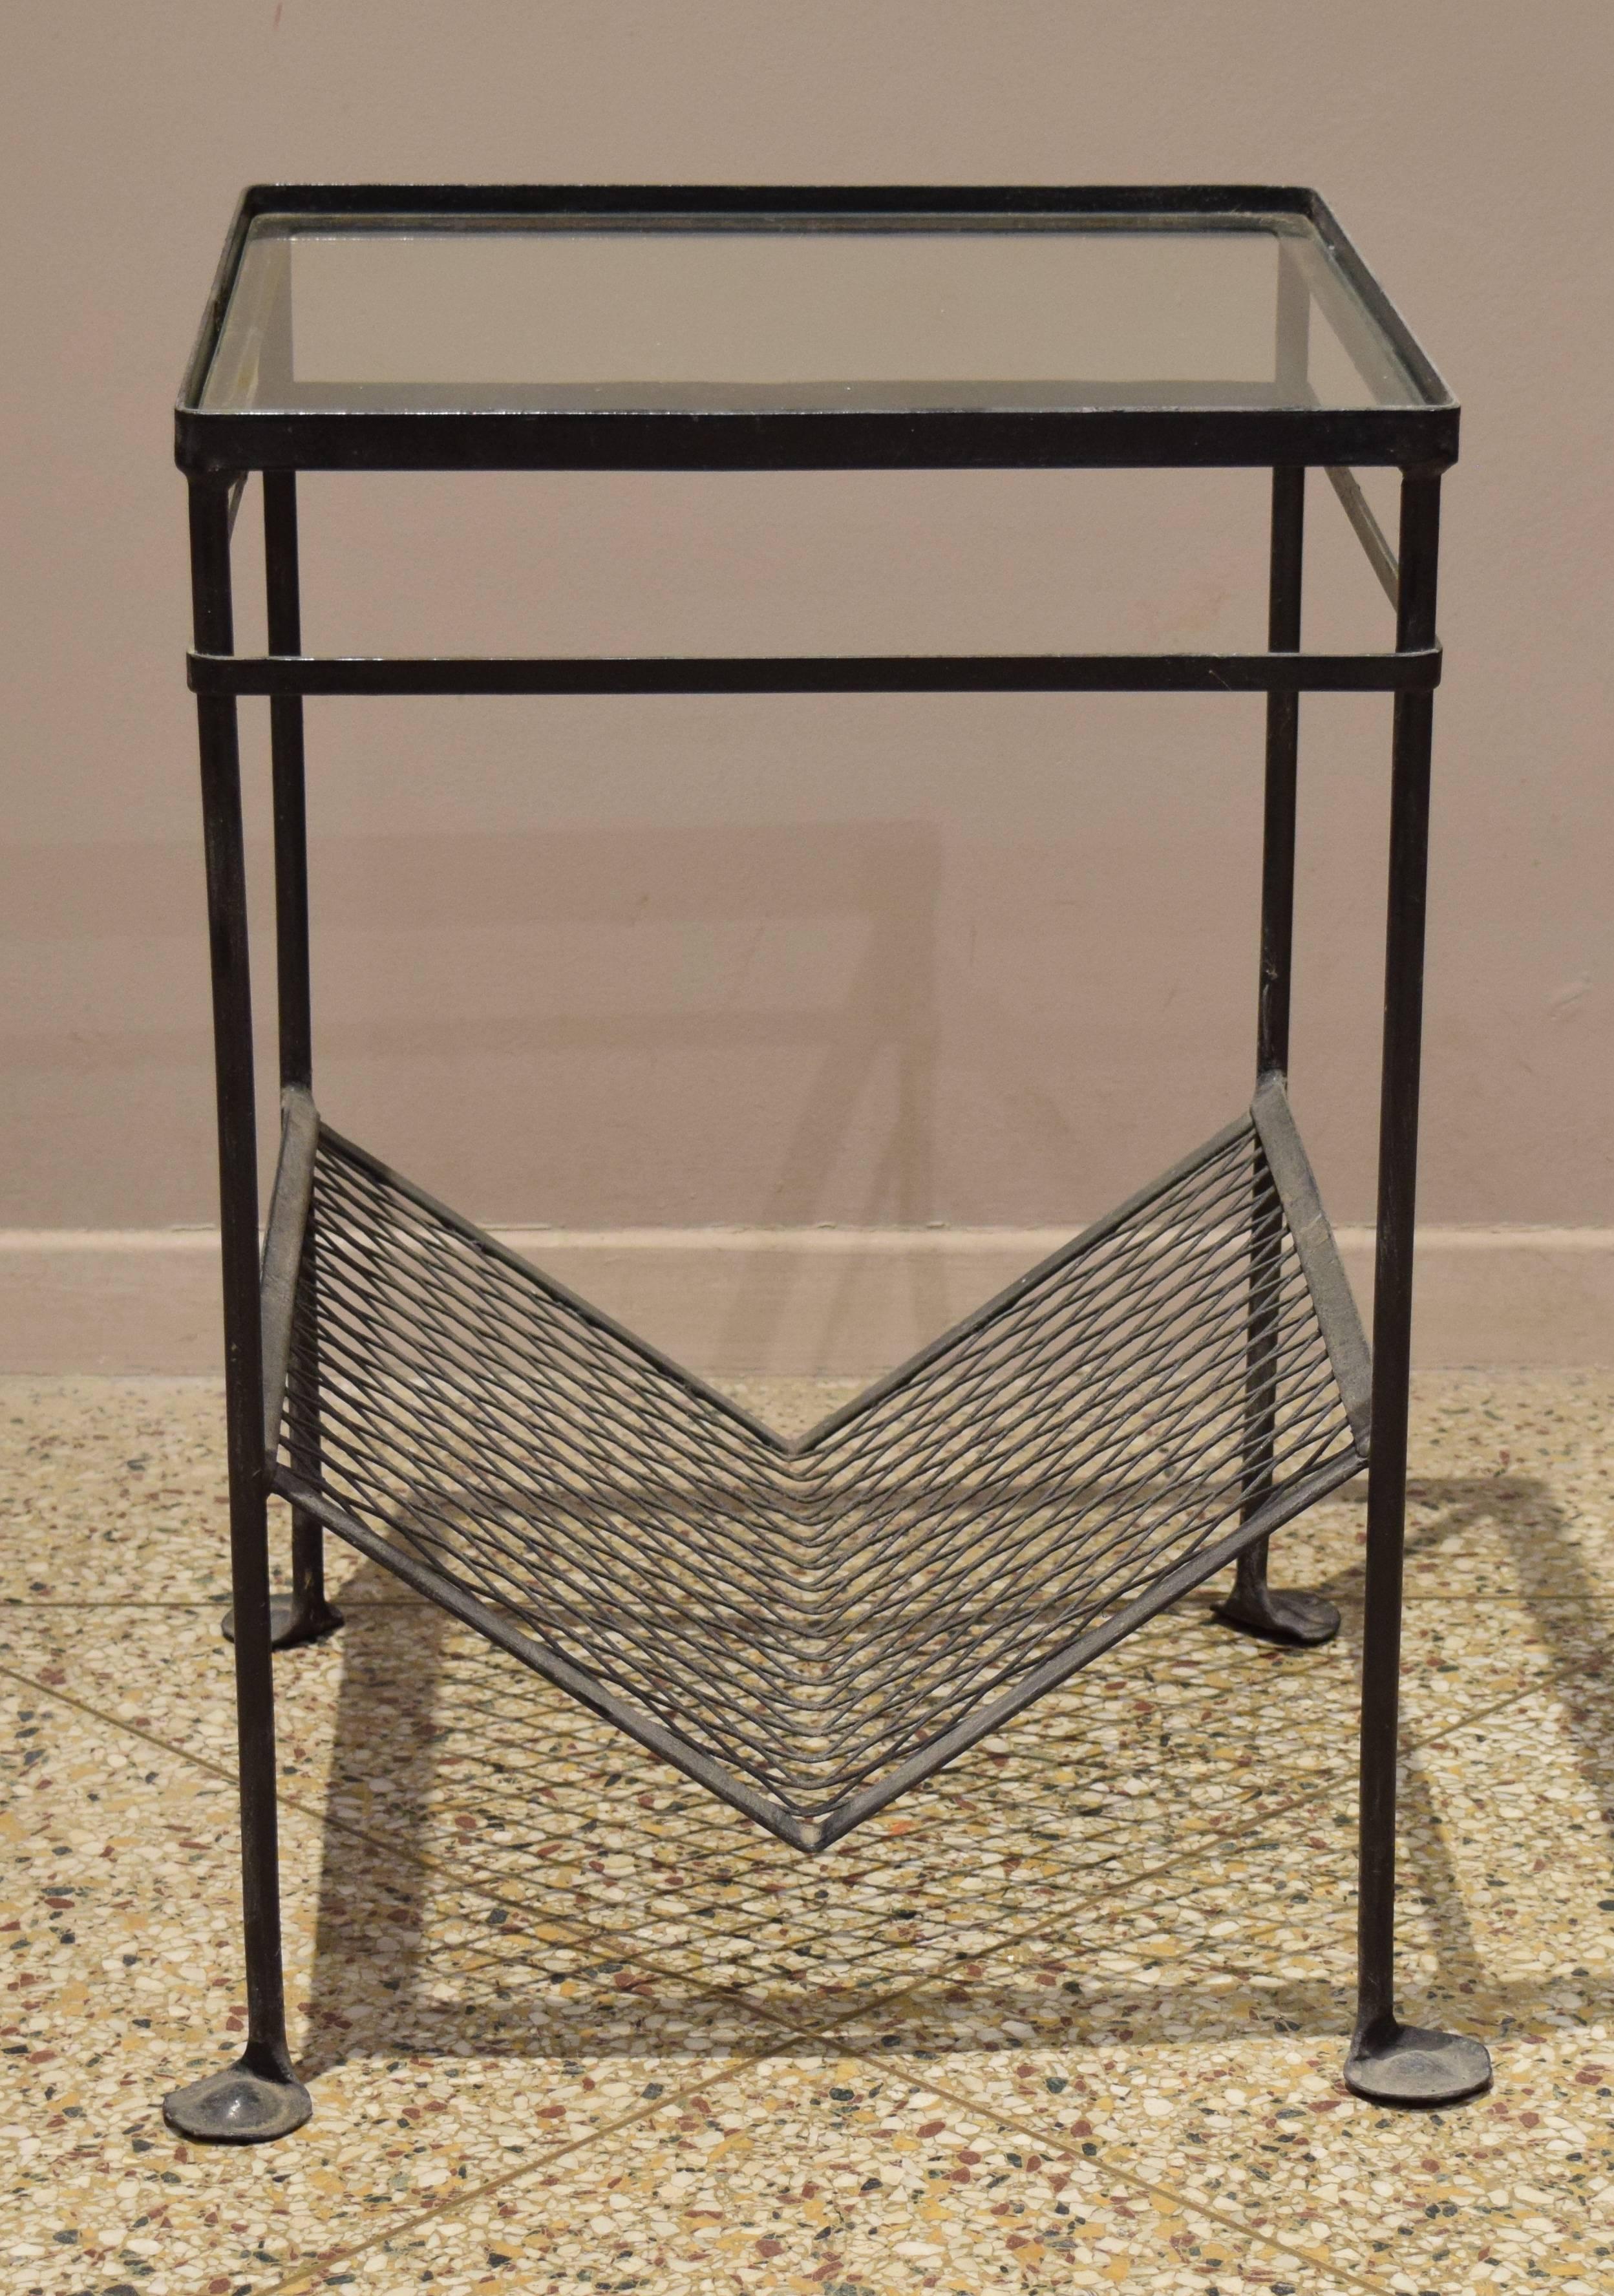 Salterini model no. 0327 side table with magazine rack. Also available in pale pink.